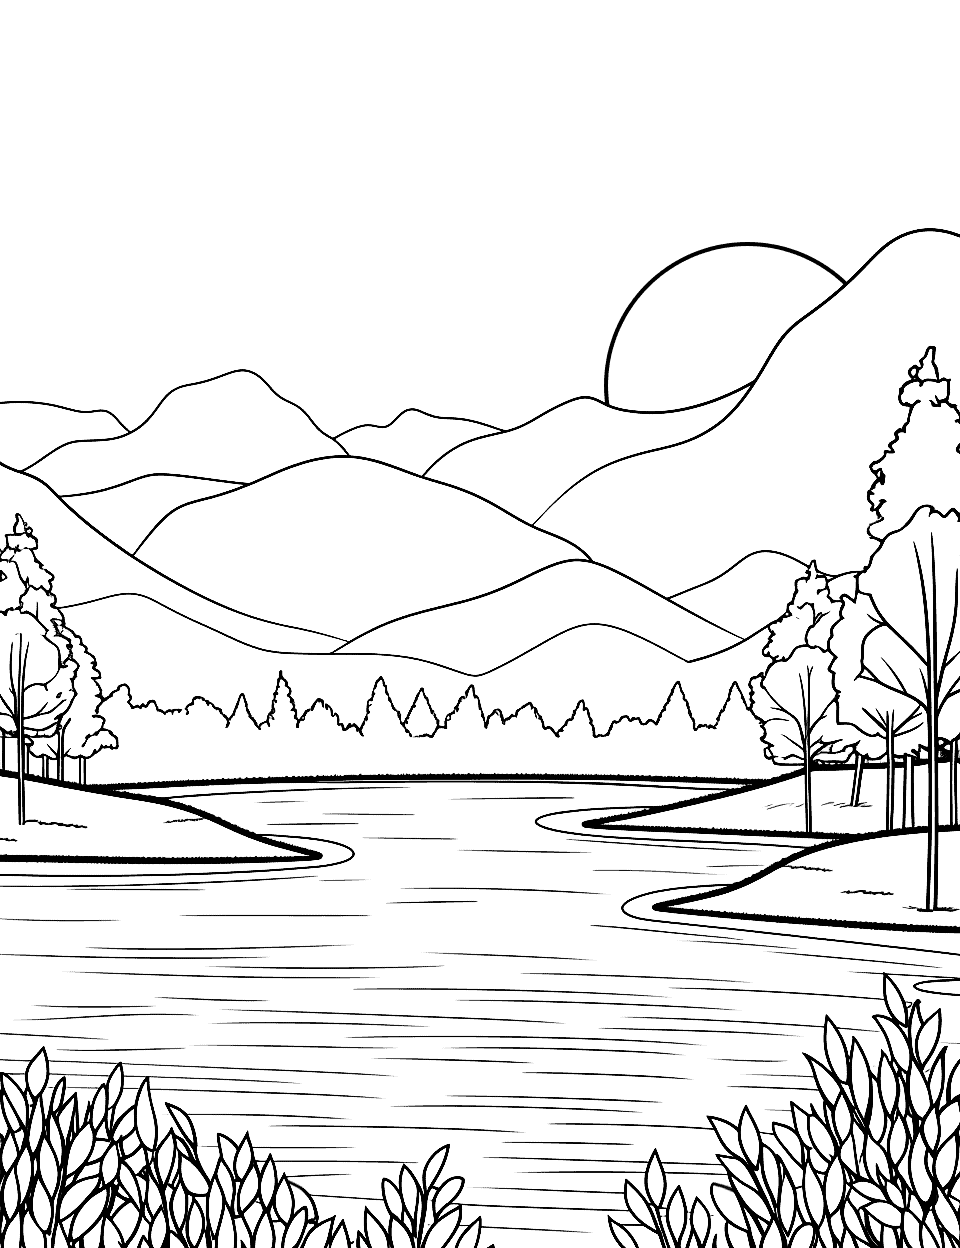 Calm Lake at Dawn Coloring Page - A still lake surrounded by trees.